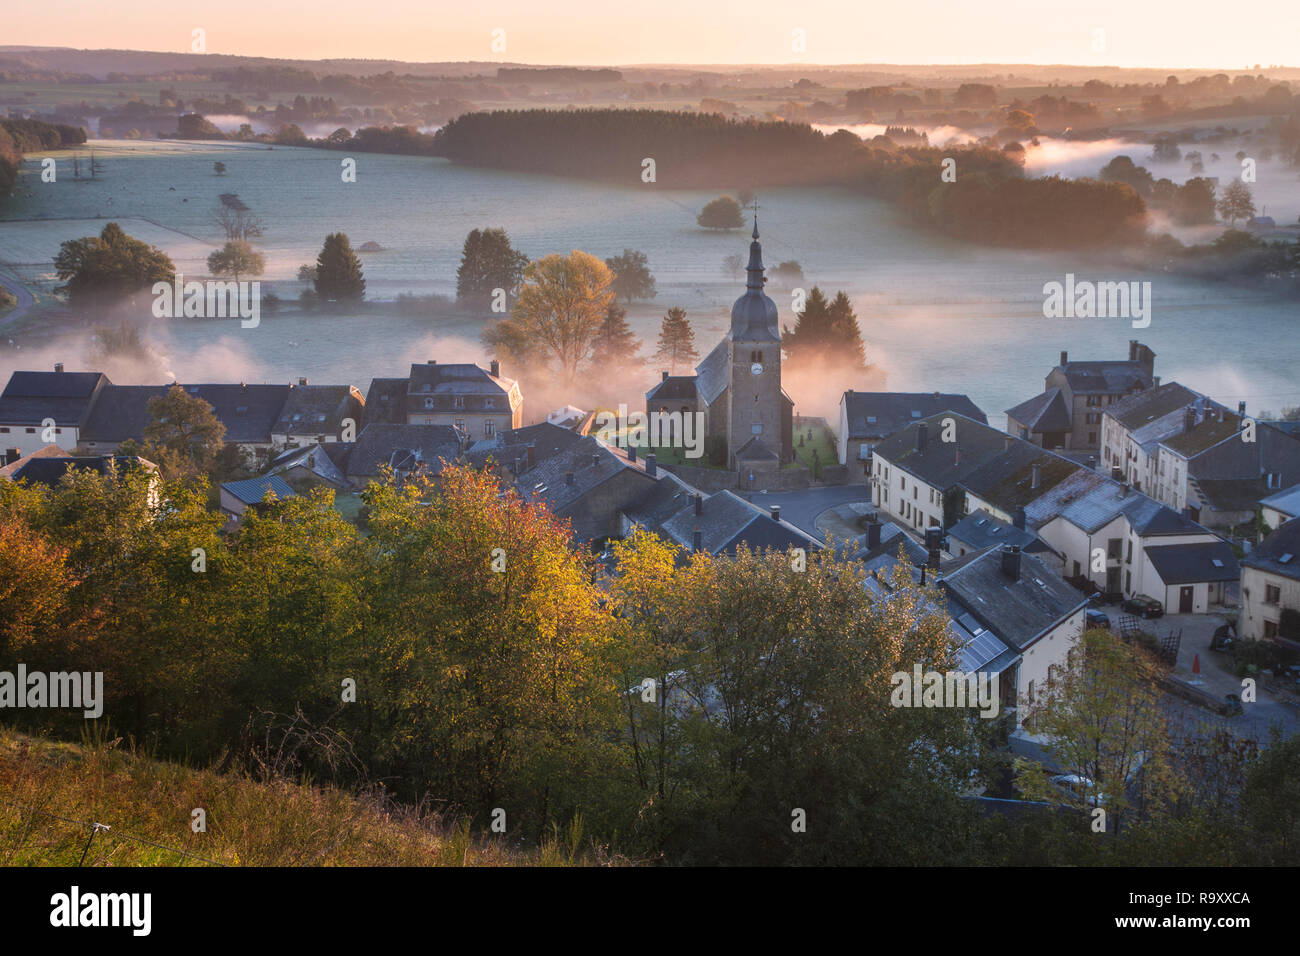 View over the village Chassepierre and frost covered meadows in autumn at dawn, Florenville, Luxembourg, Belgian Ardennes, Wallonia, Belgium Stock Photo